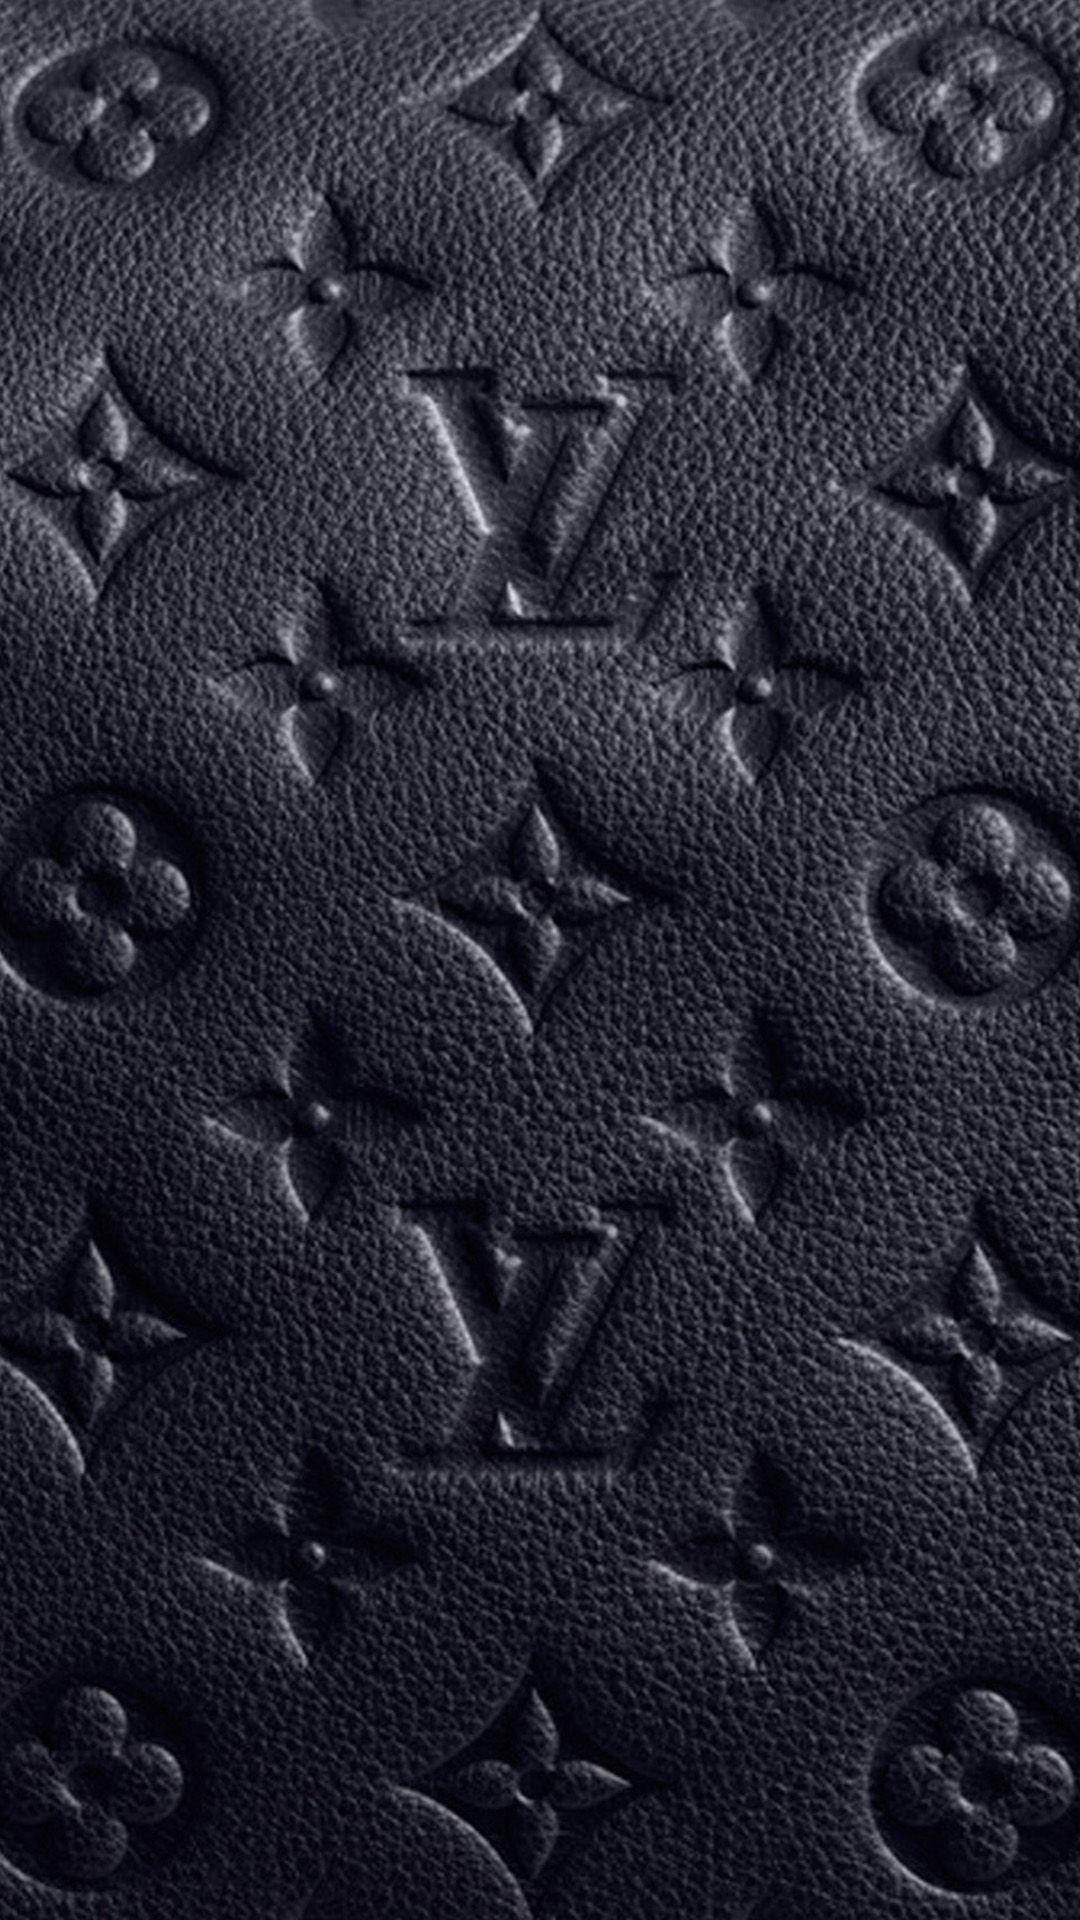 Black And White Louis Vuitton Wallpapers